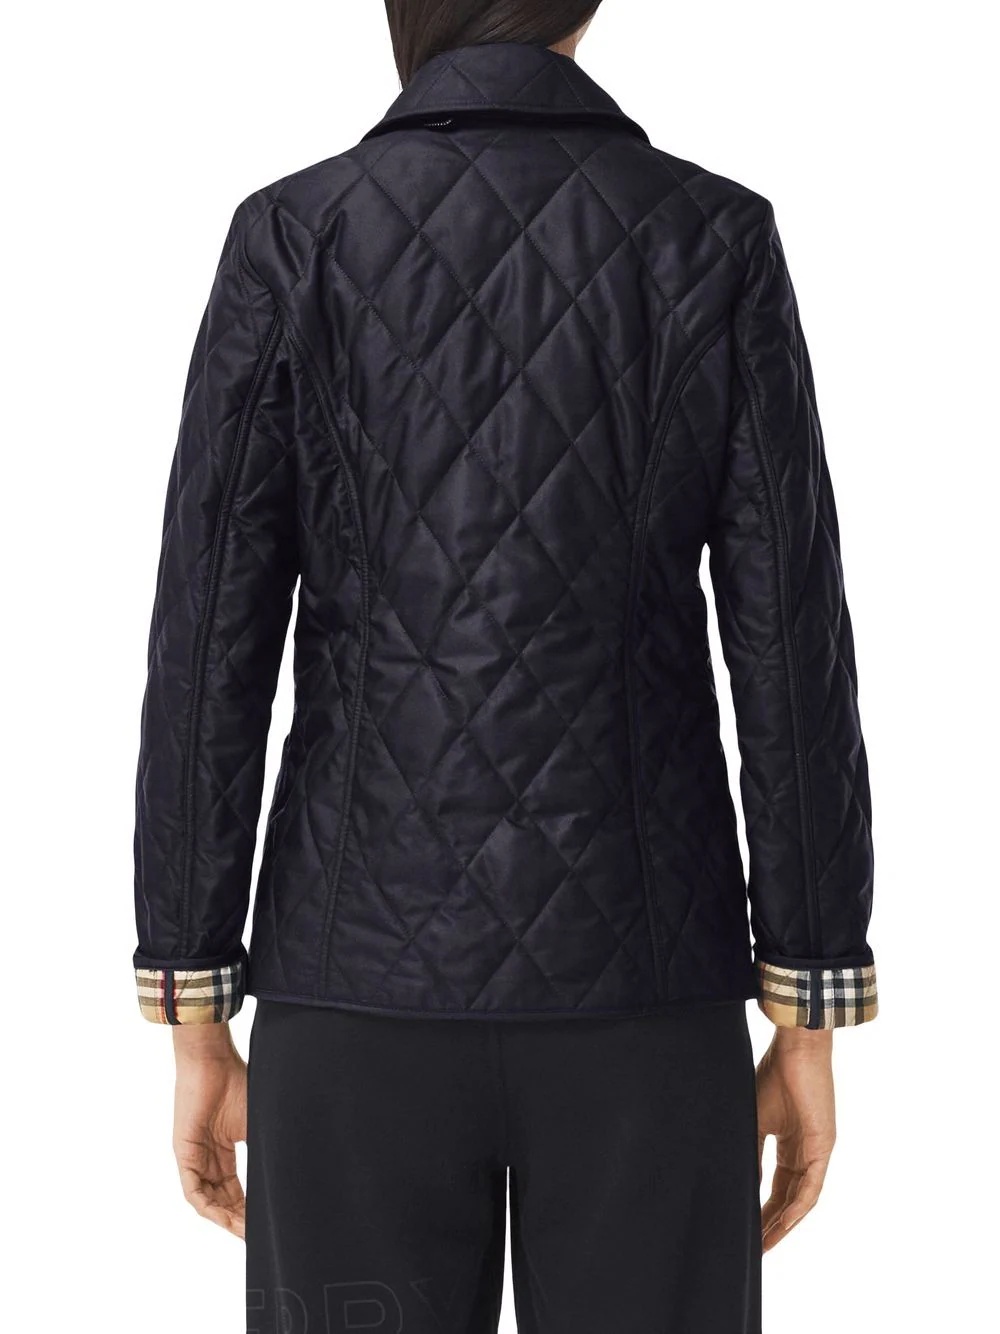 diamond-quilted thermoregulated jacket - 4